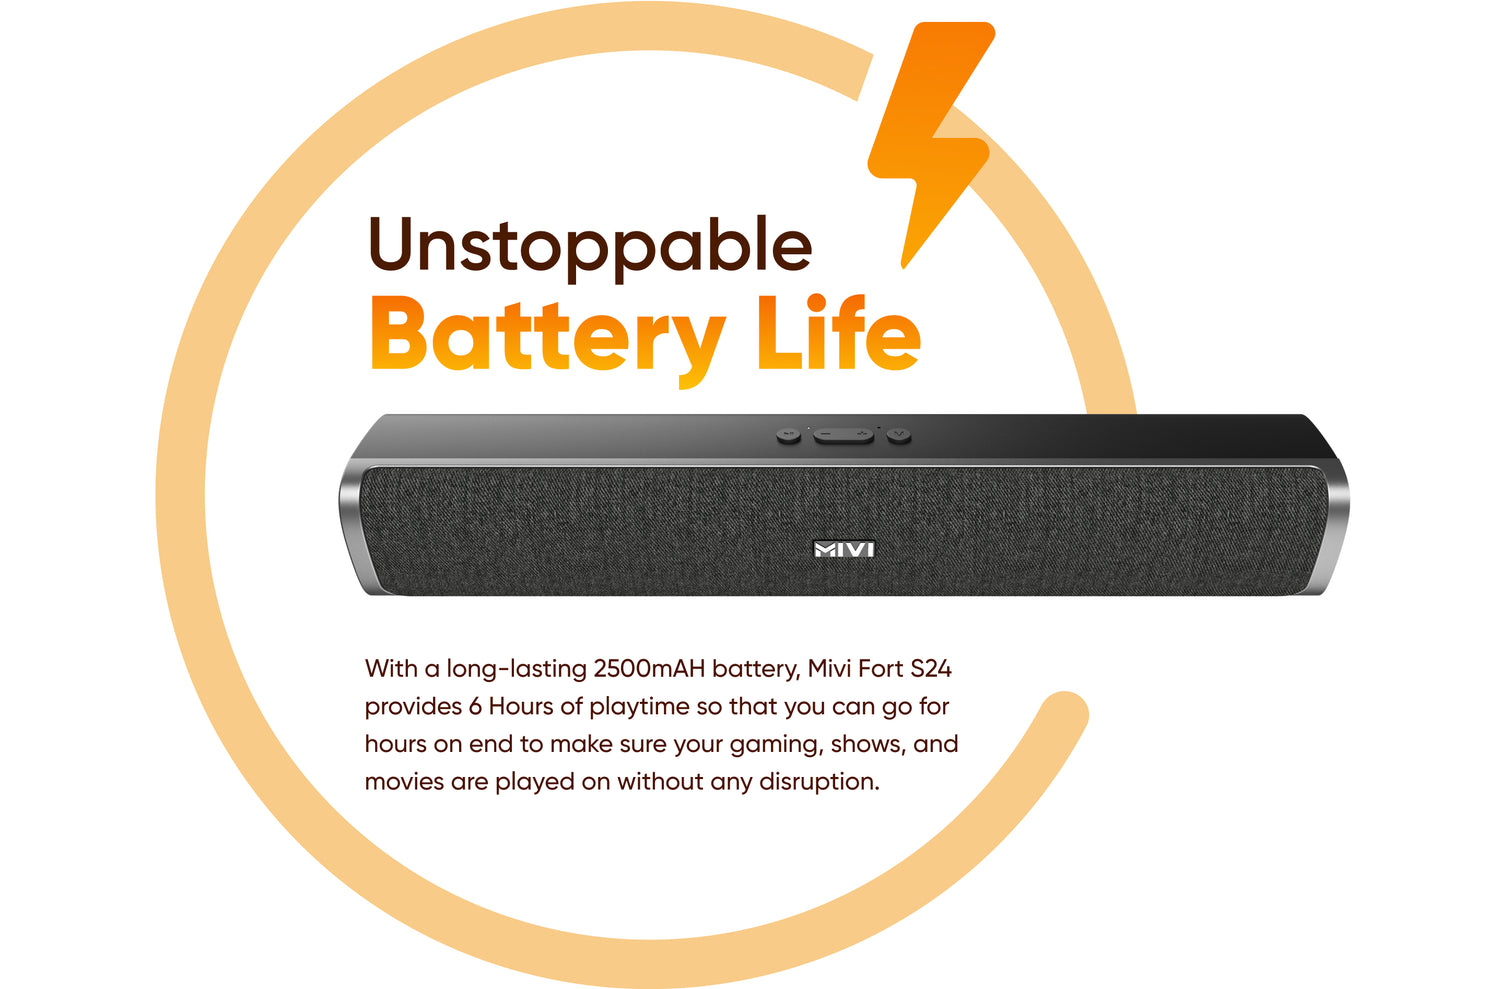 Unstoppable Battery Life - With a long-lasting 2500mAH battery, Mivi Fort S24 provides 6 Hours of playtime so that you can go for hours on end to make sure your gaming, shows, and movies are played on without any disruption.